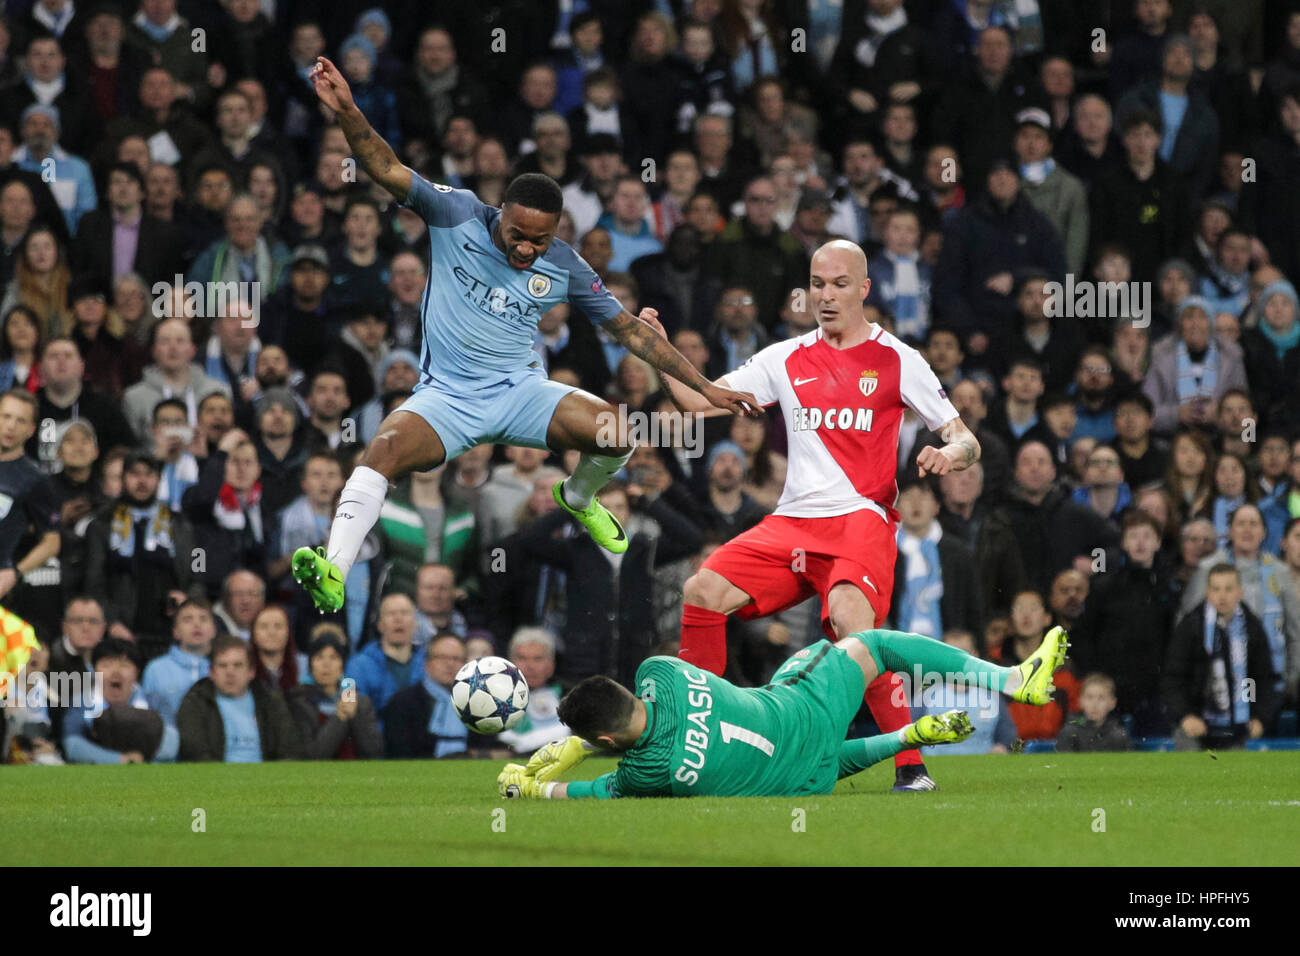 Manchester, UK. 21st Feb, 2017. Danijel Subasic of Monaco saves at Raheem Sterling of Manchester City's feet during the UEFA Champions League Round of 16 first leg match between Manchester City and AS Monaco at the Etihad Stadium on February 21st 2017 in Manchester, England. Credit: PHC Images/Alamy Live News Stock Photo